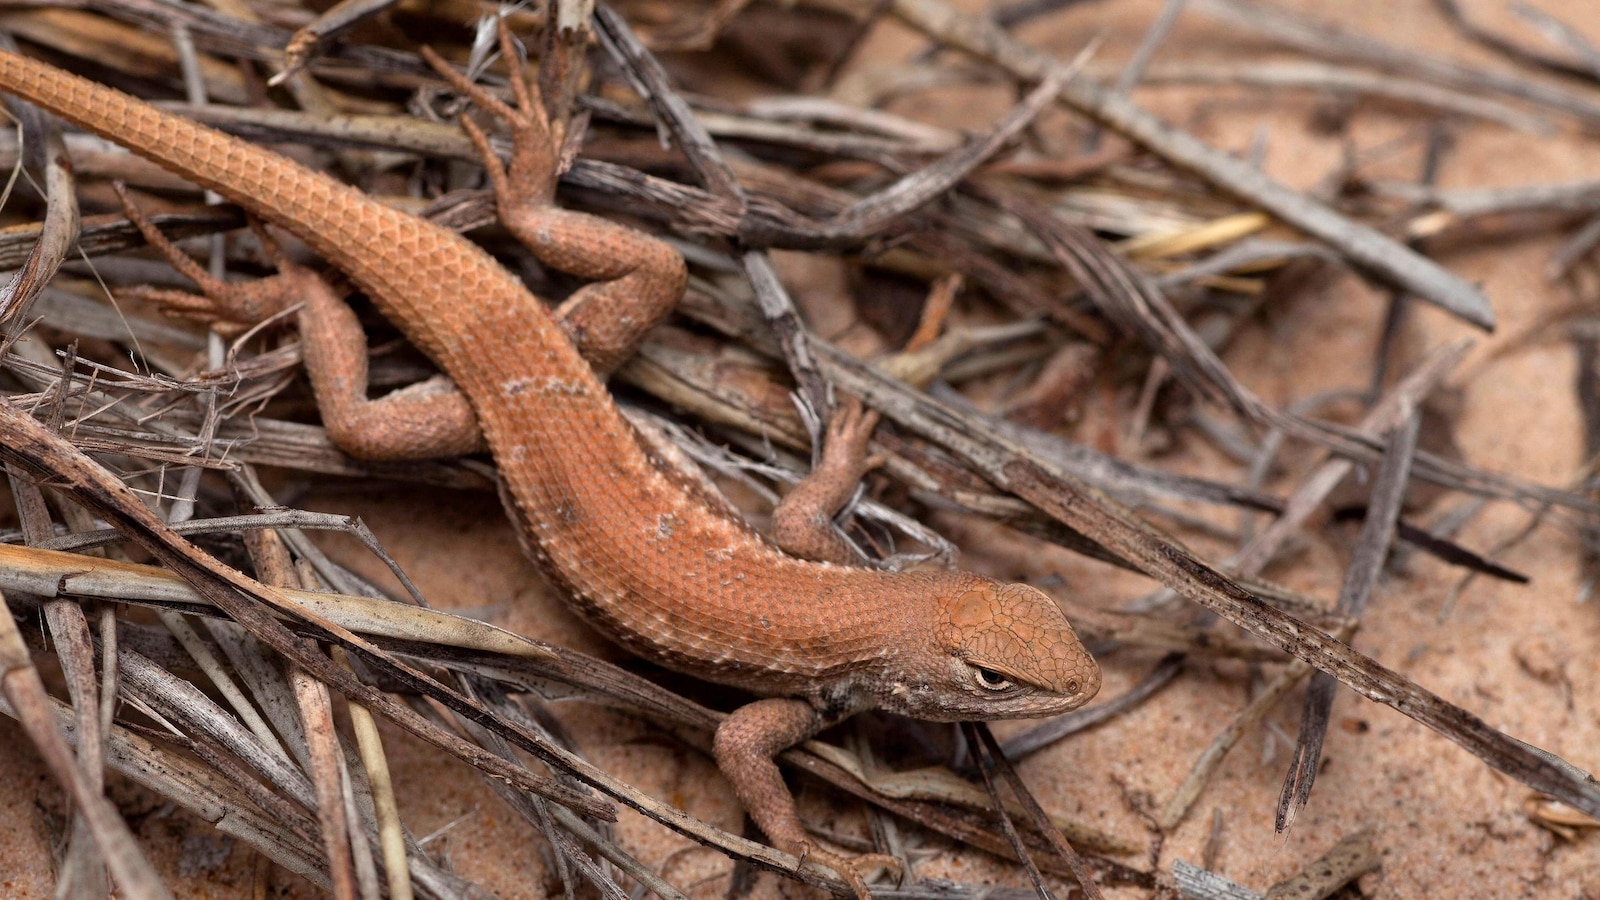 New endangered listing for rare lizard could slow oil and gas drilling in New Mexico and West Texas